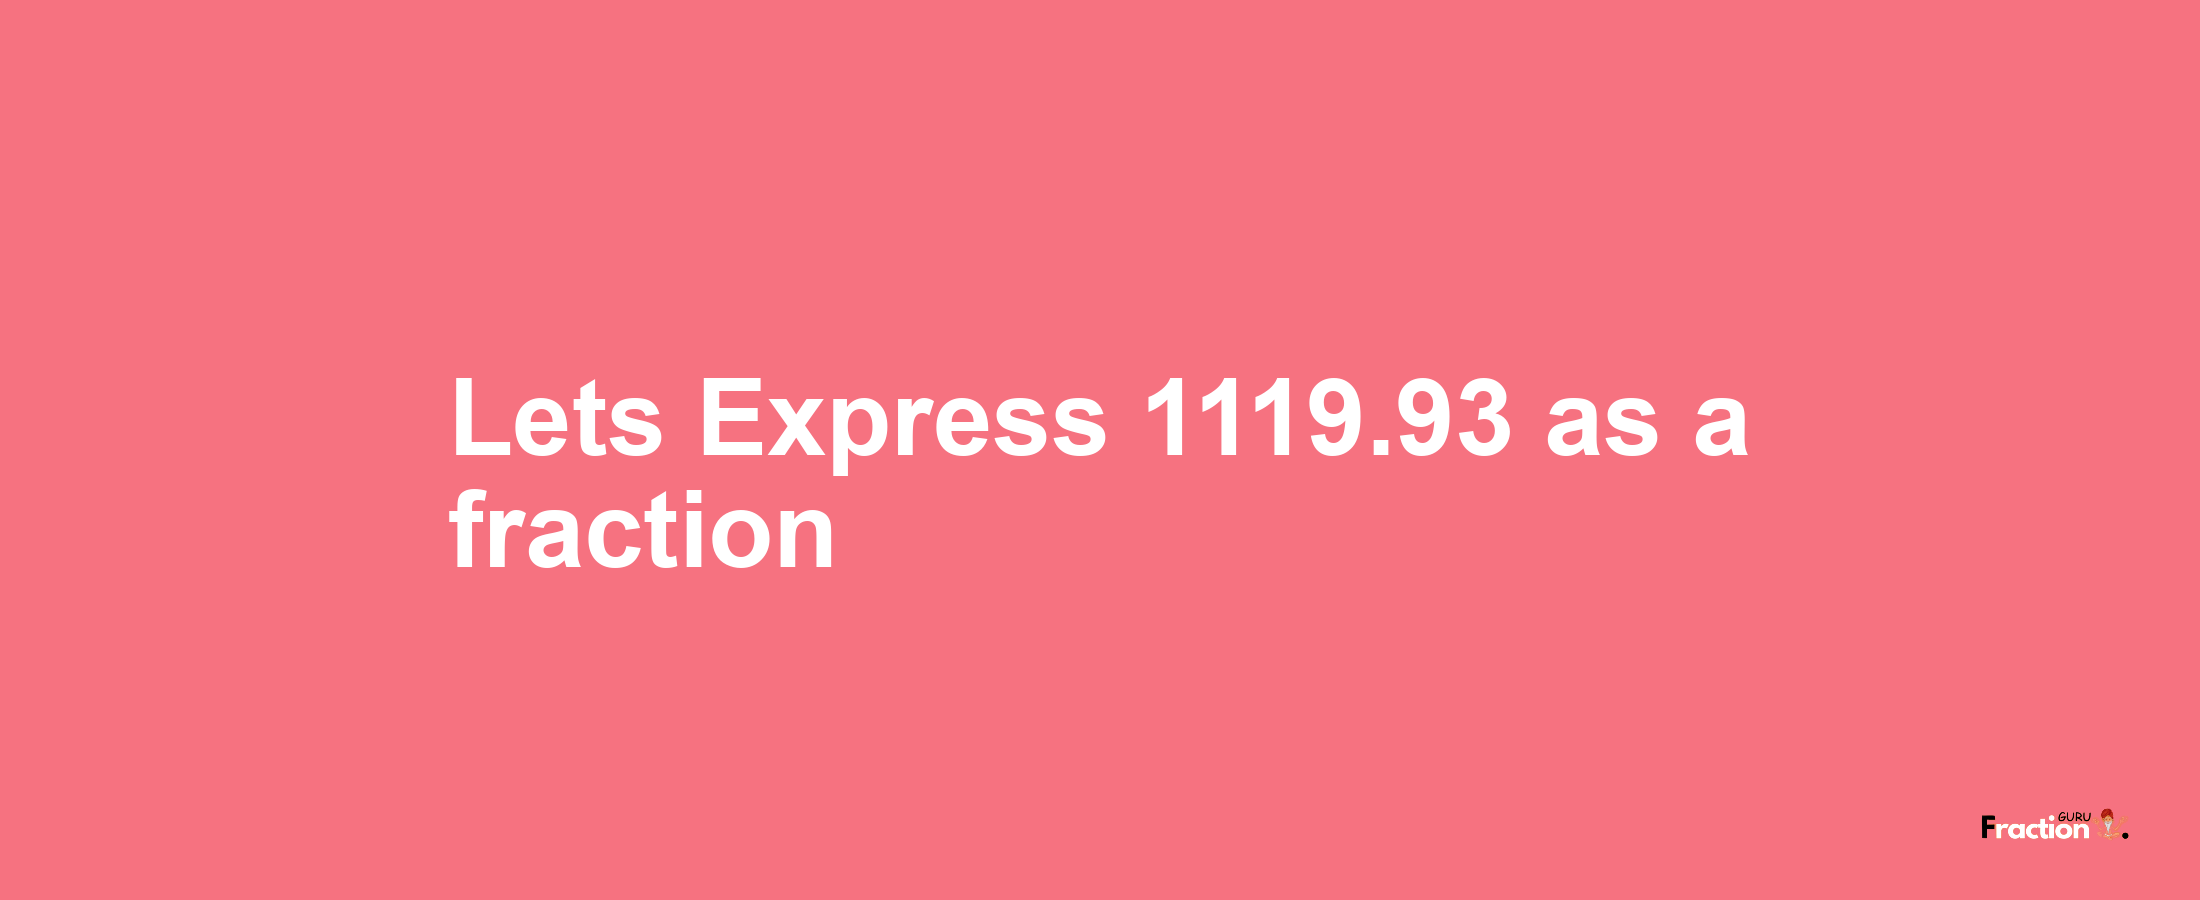 Lets Express 1119.93 as afraction